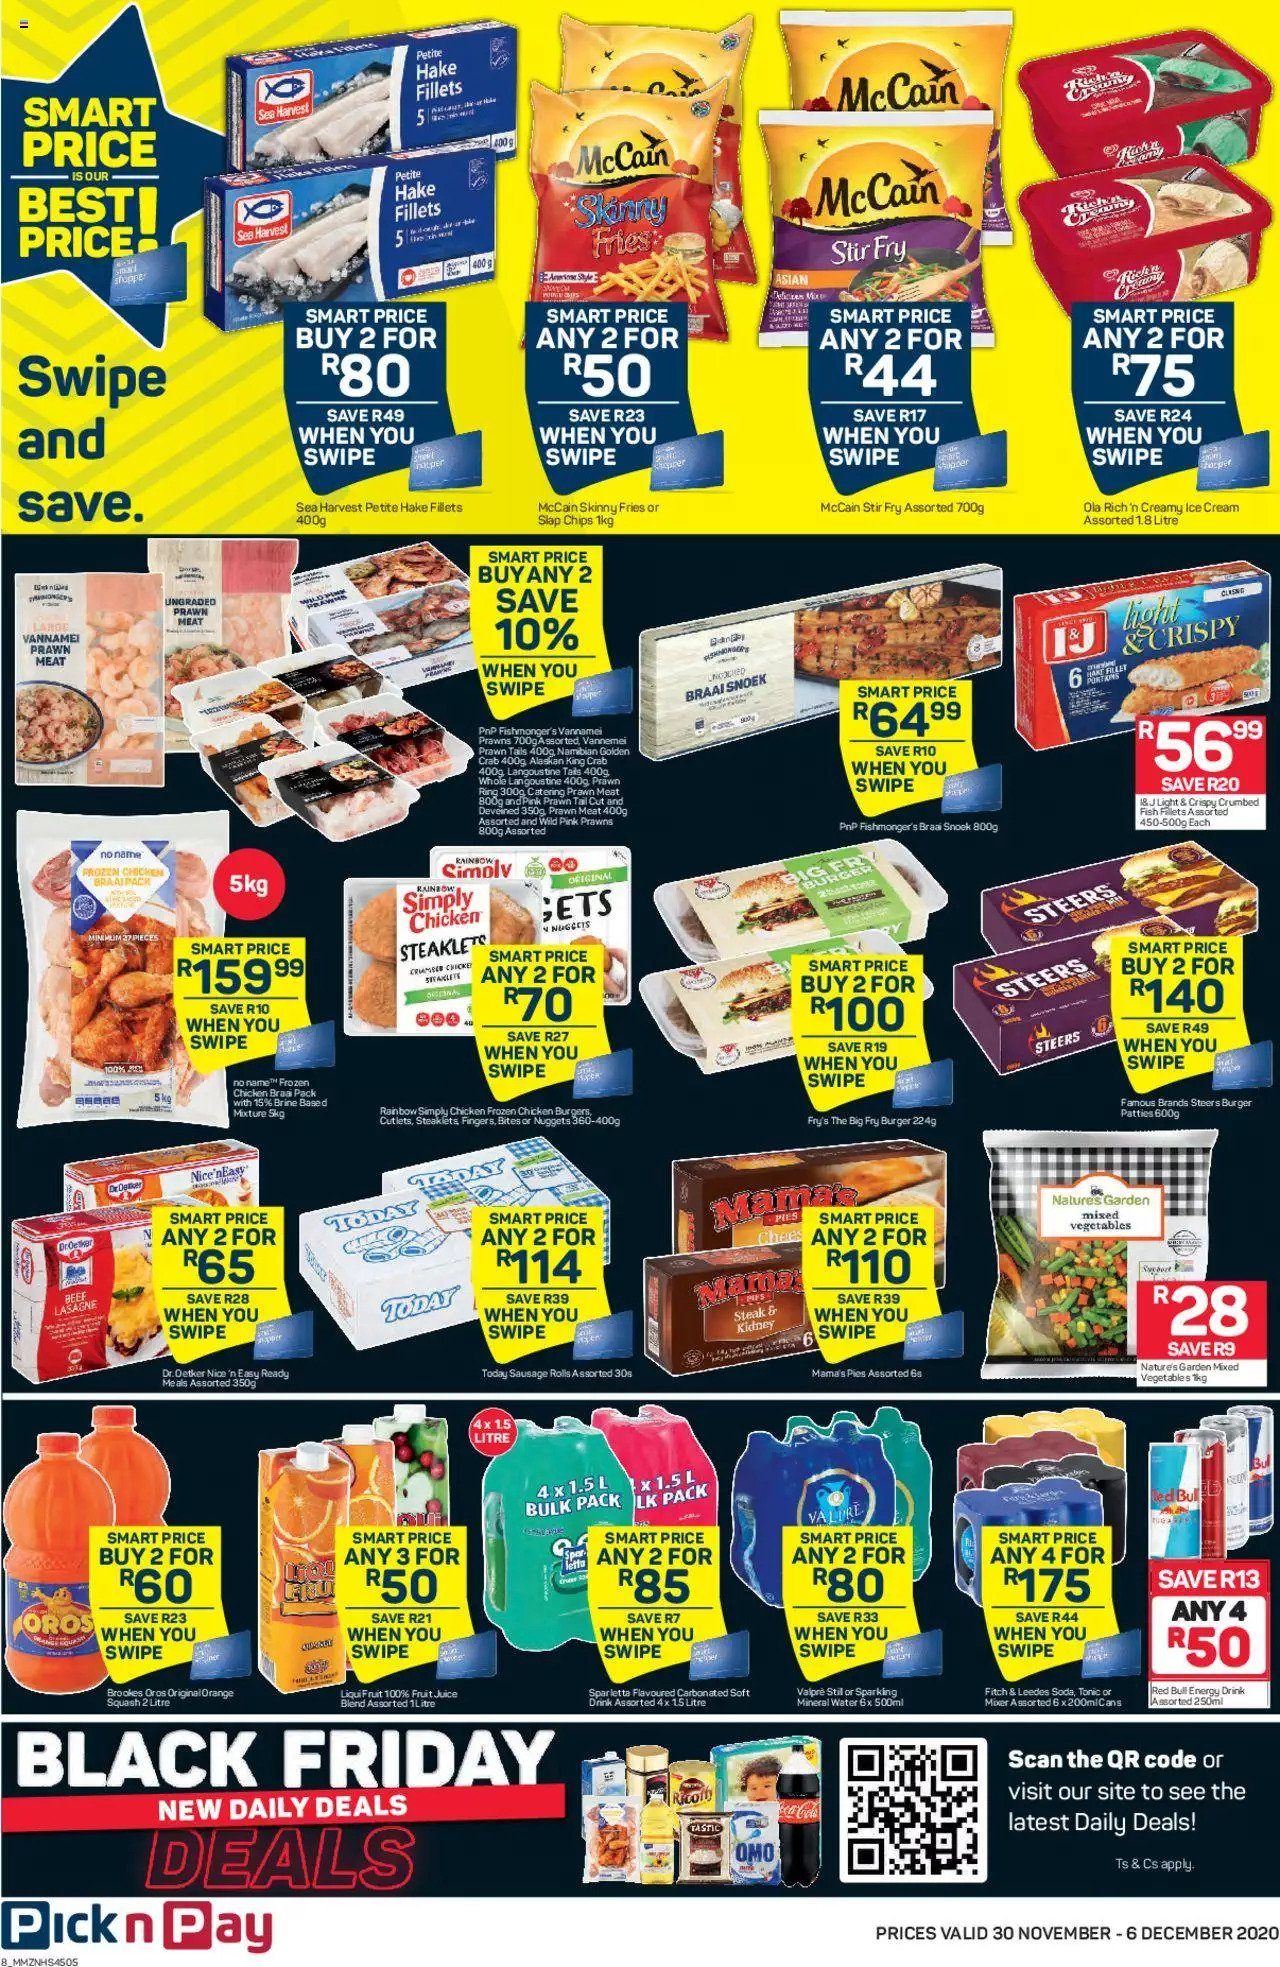 Pnp Specials Black Friday Extended Pick n Pay Catalogue Black Friday